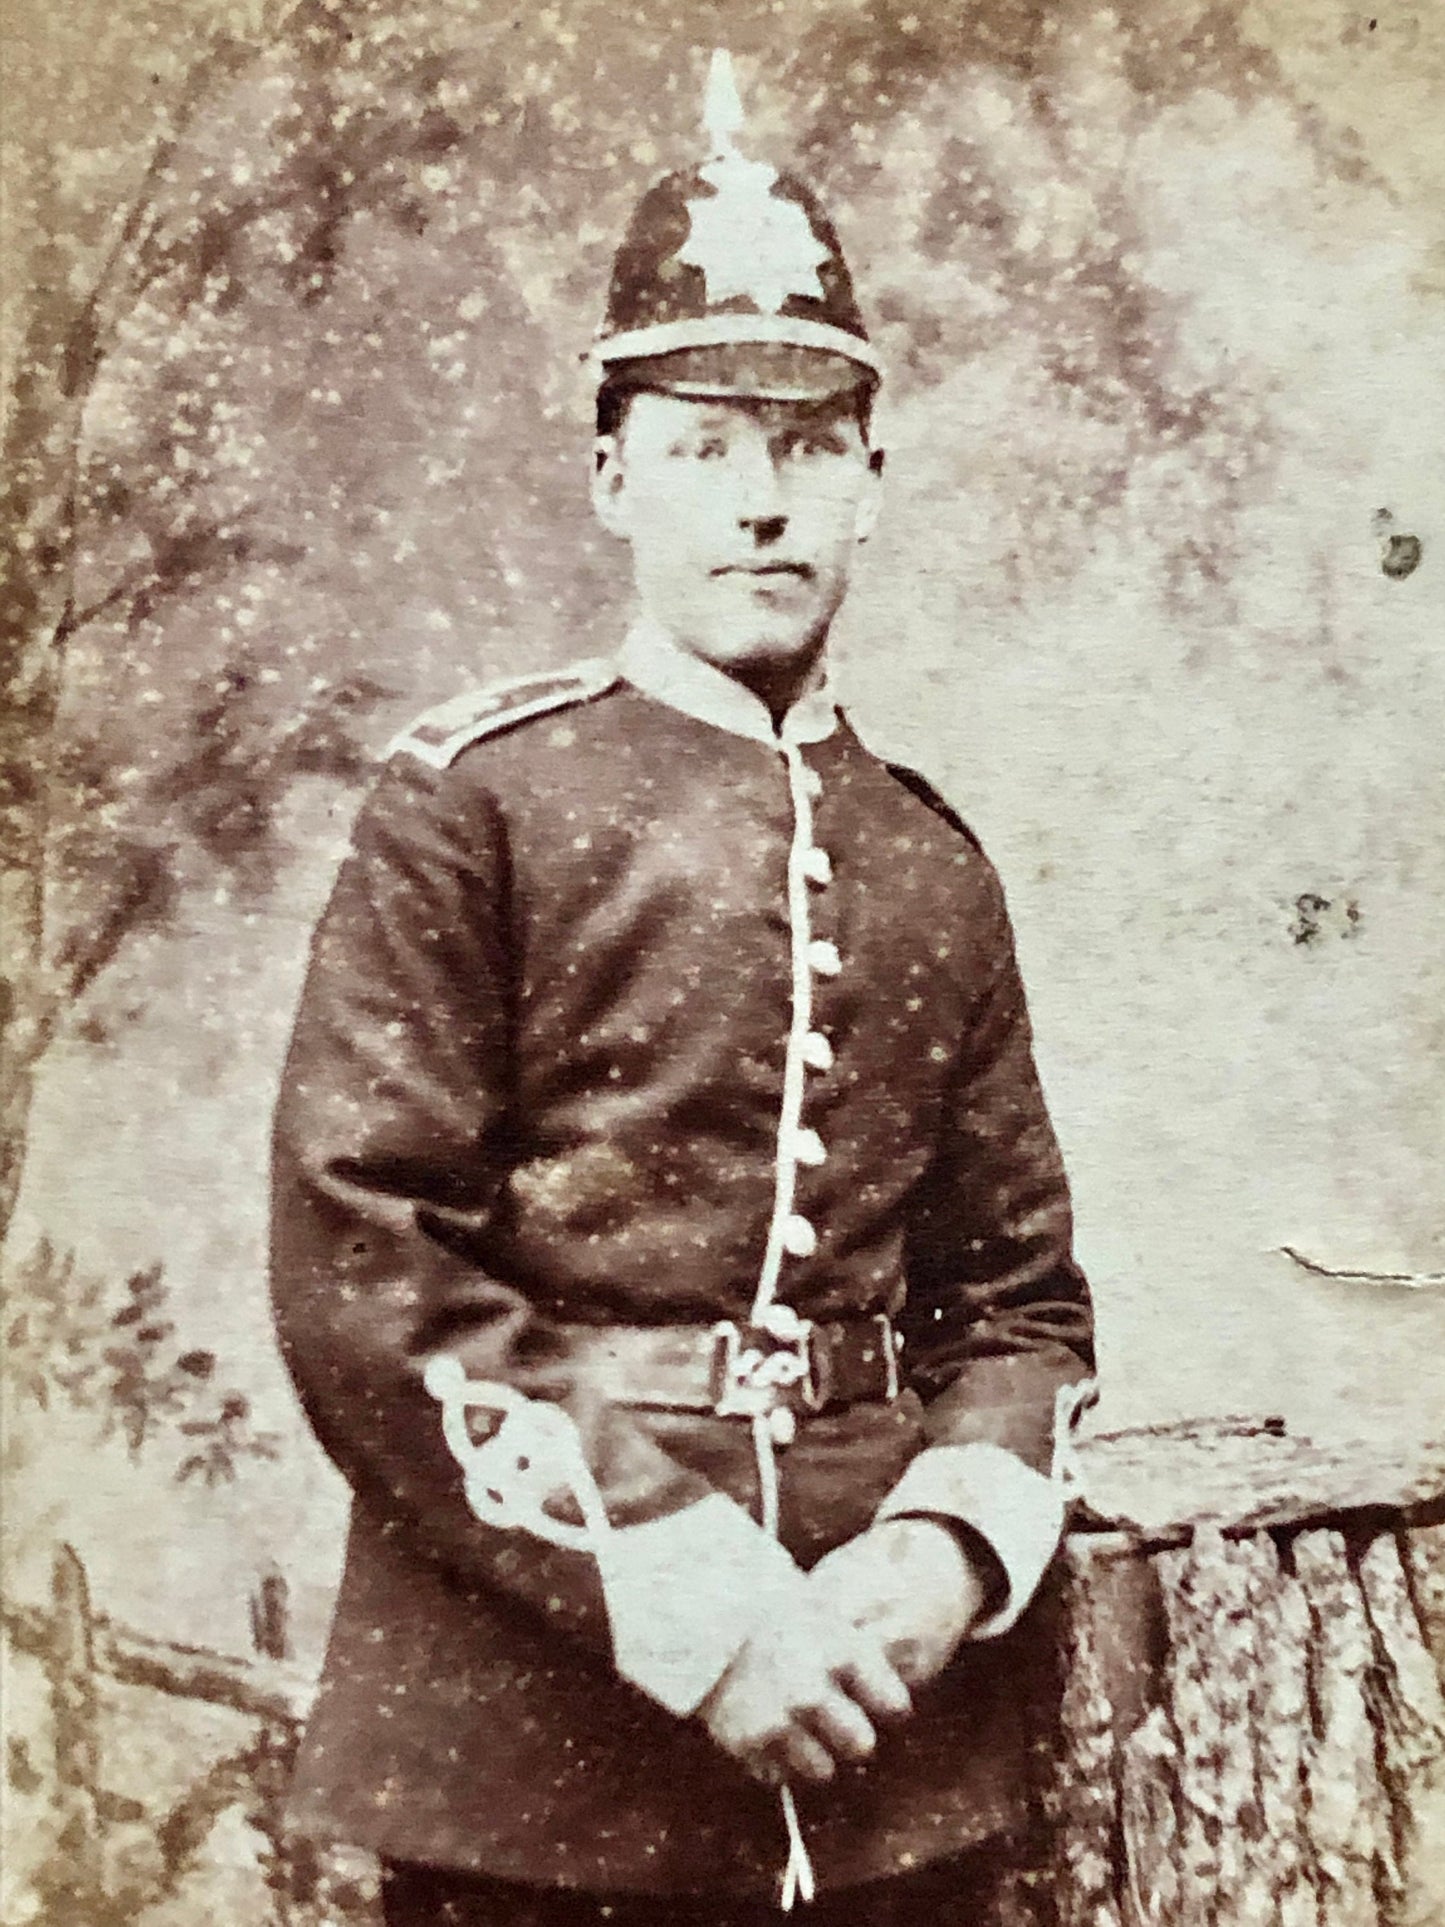 A Policeman. A Carte de Visite. By Alfred Darby of Smallgate Street, Beccles in Suffolk. Late 19th Century. Size: 6.3 x 10.5 cms.